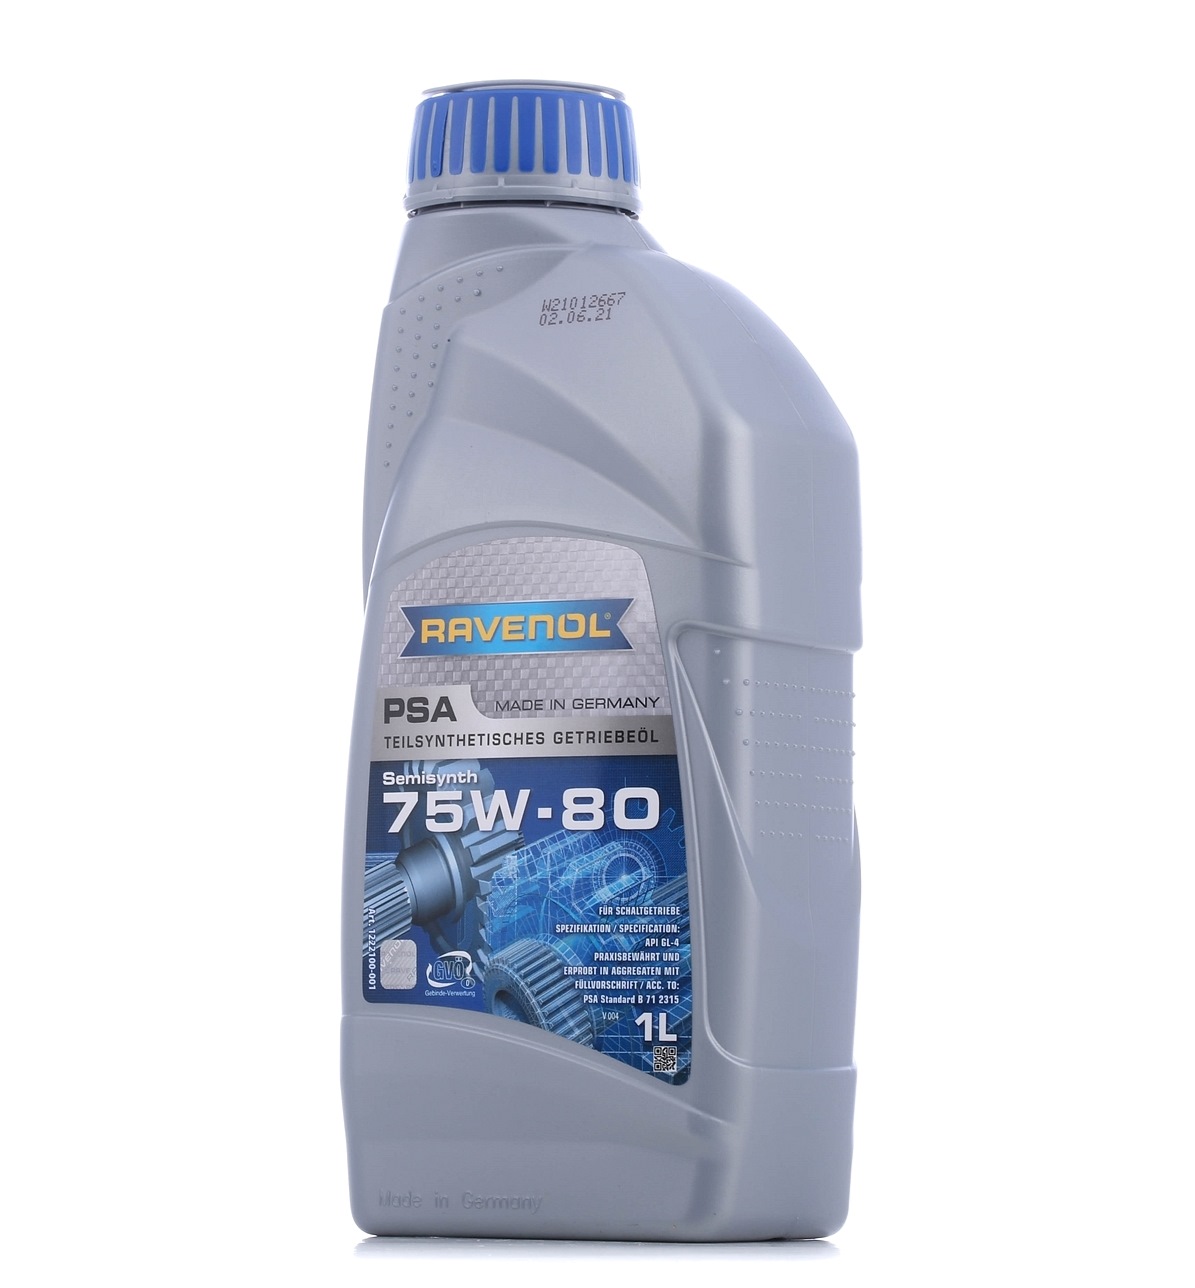 RAVENOL Hot Red Grease HRG 3 1222100-001-01-999 Transmission fluid 75W-80, Capacity: 1l, Part Synthetic Oil